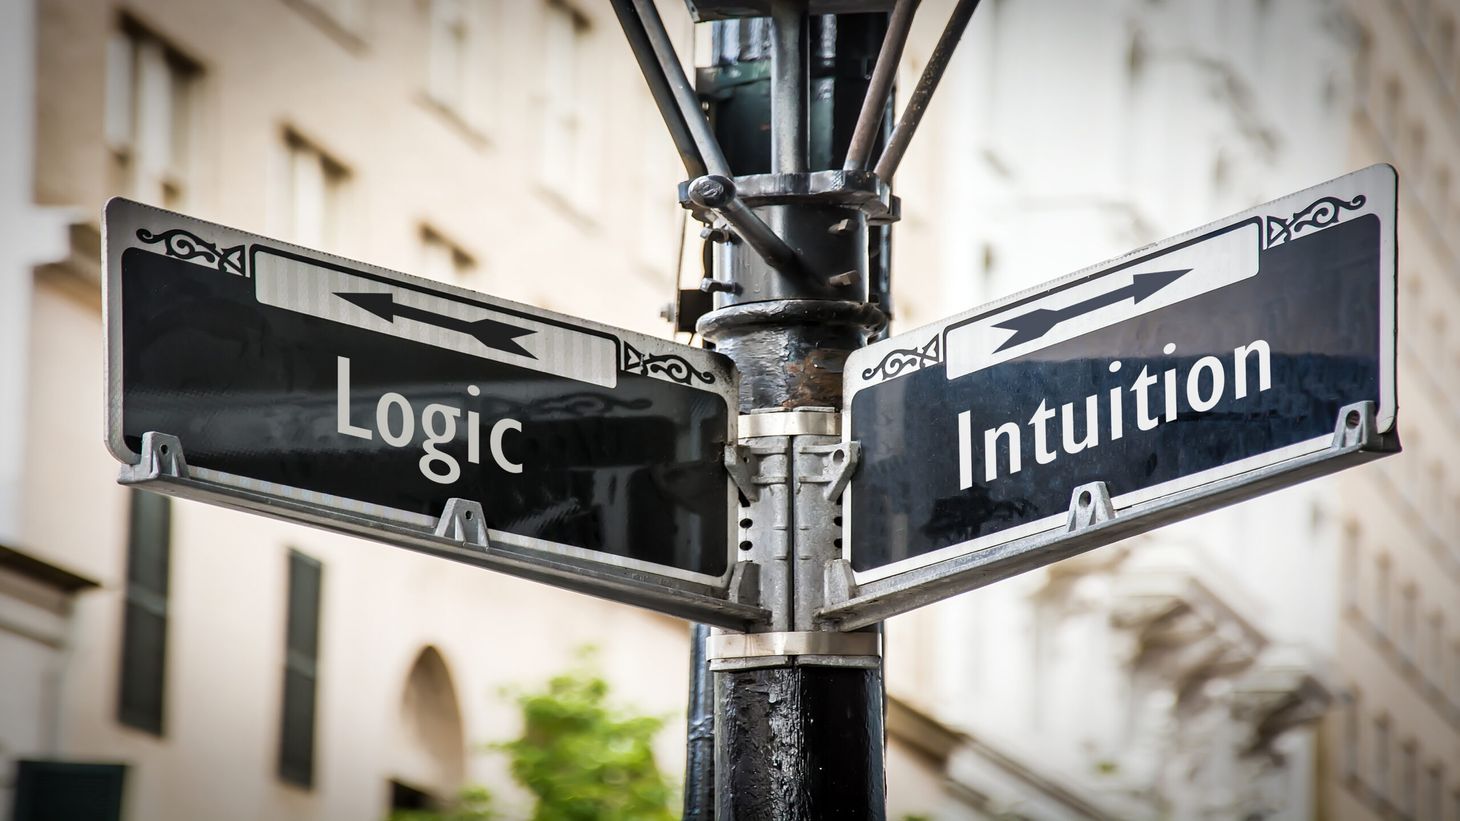 a picture of a street sign on logic and intuition